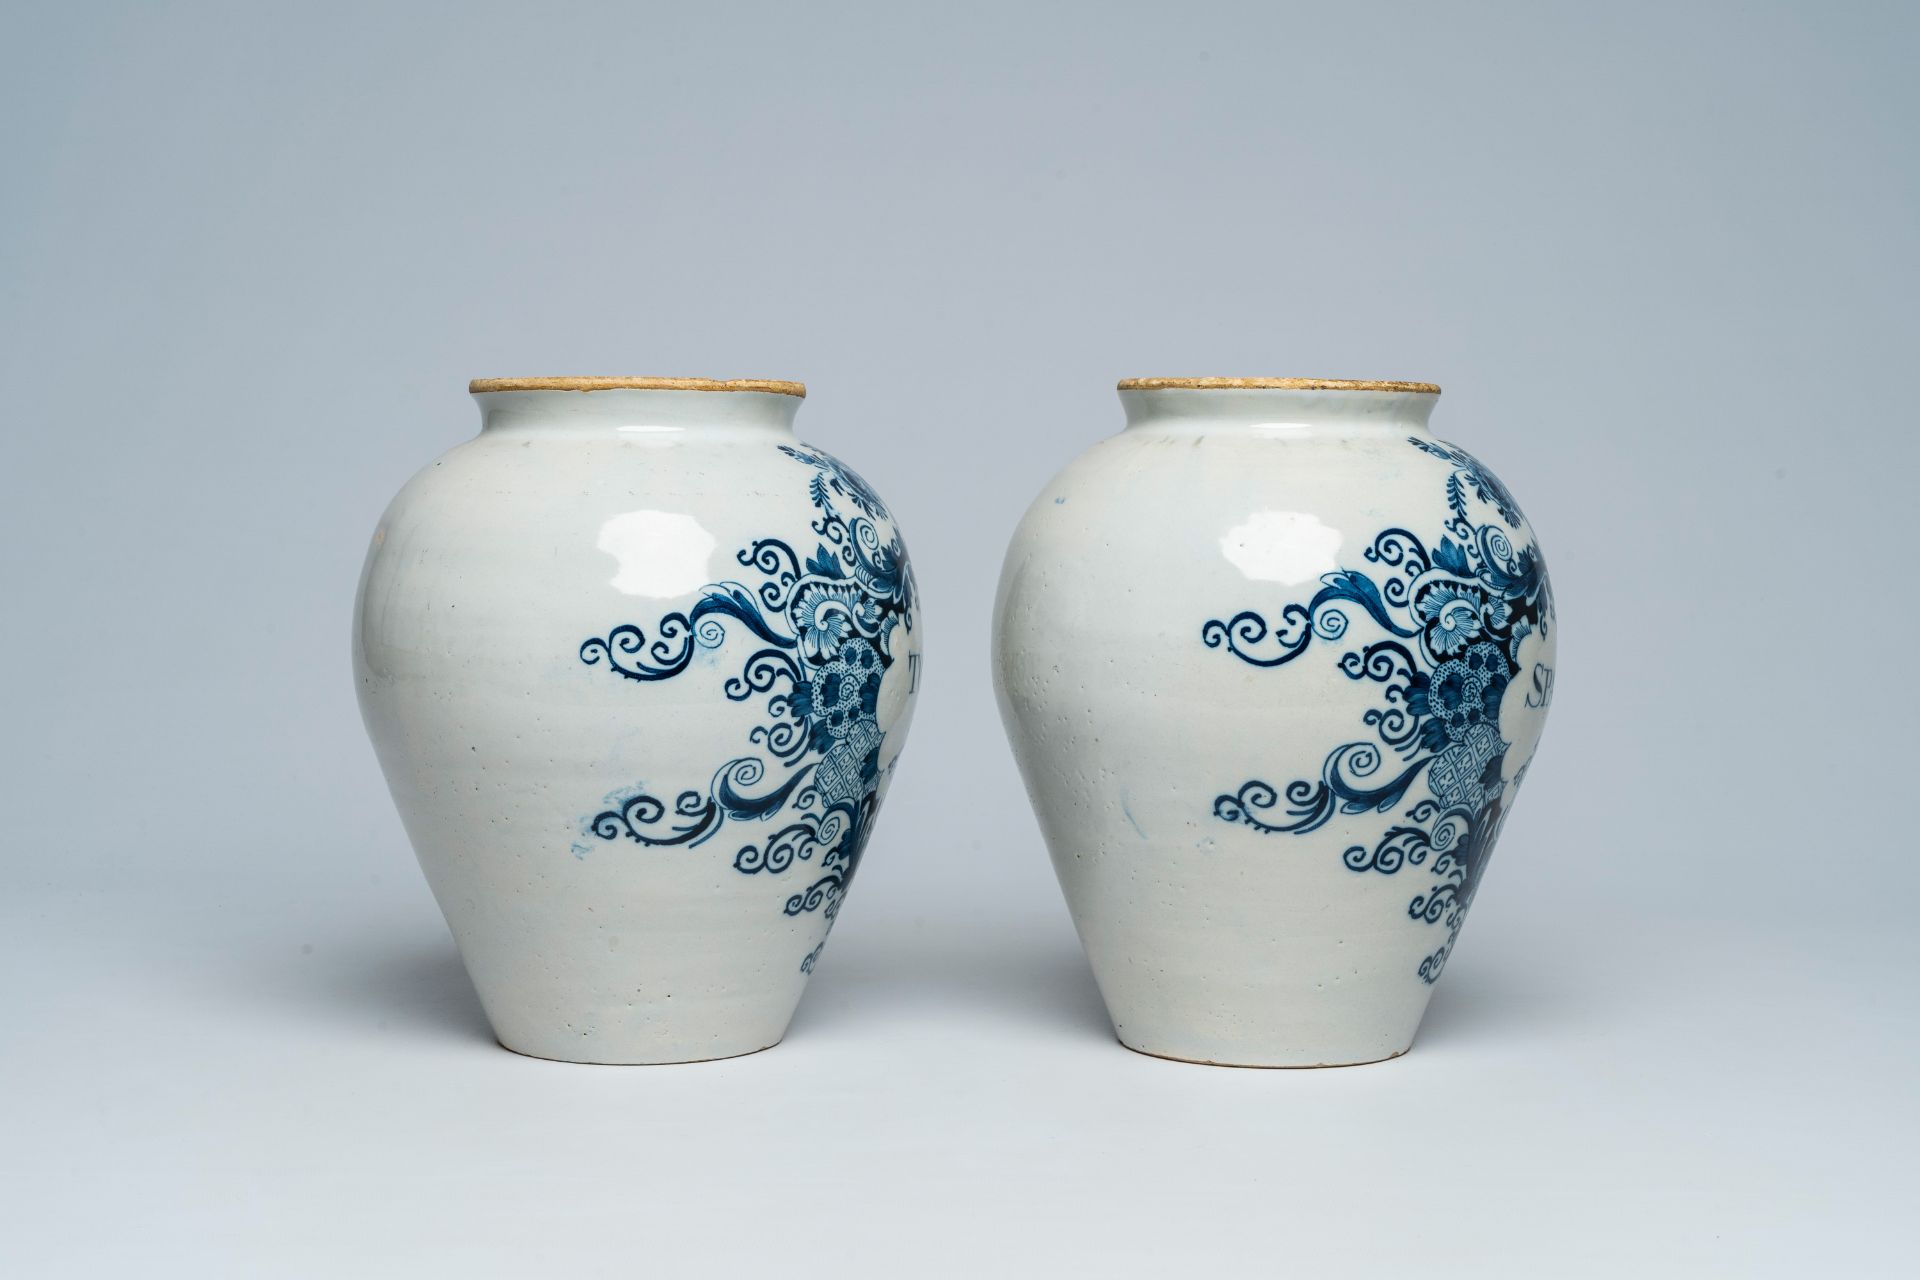 A pair of Dutch Delft blue and white tobacco jars with brass lids, 18th C. - Image 5 of 7